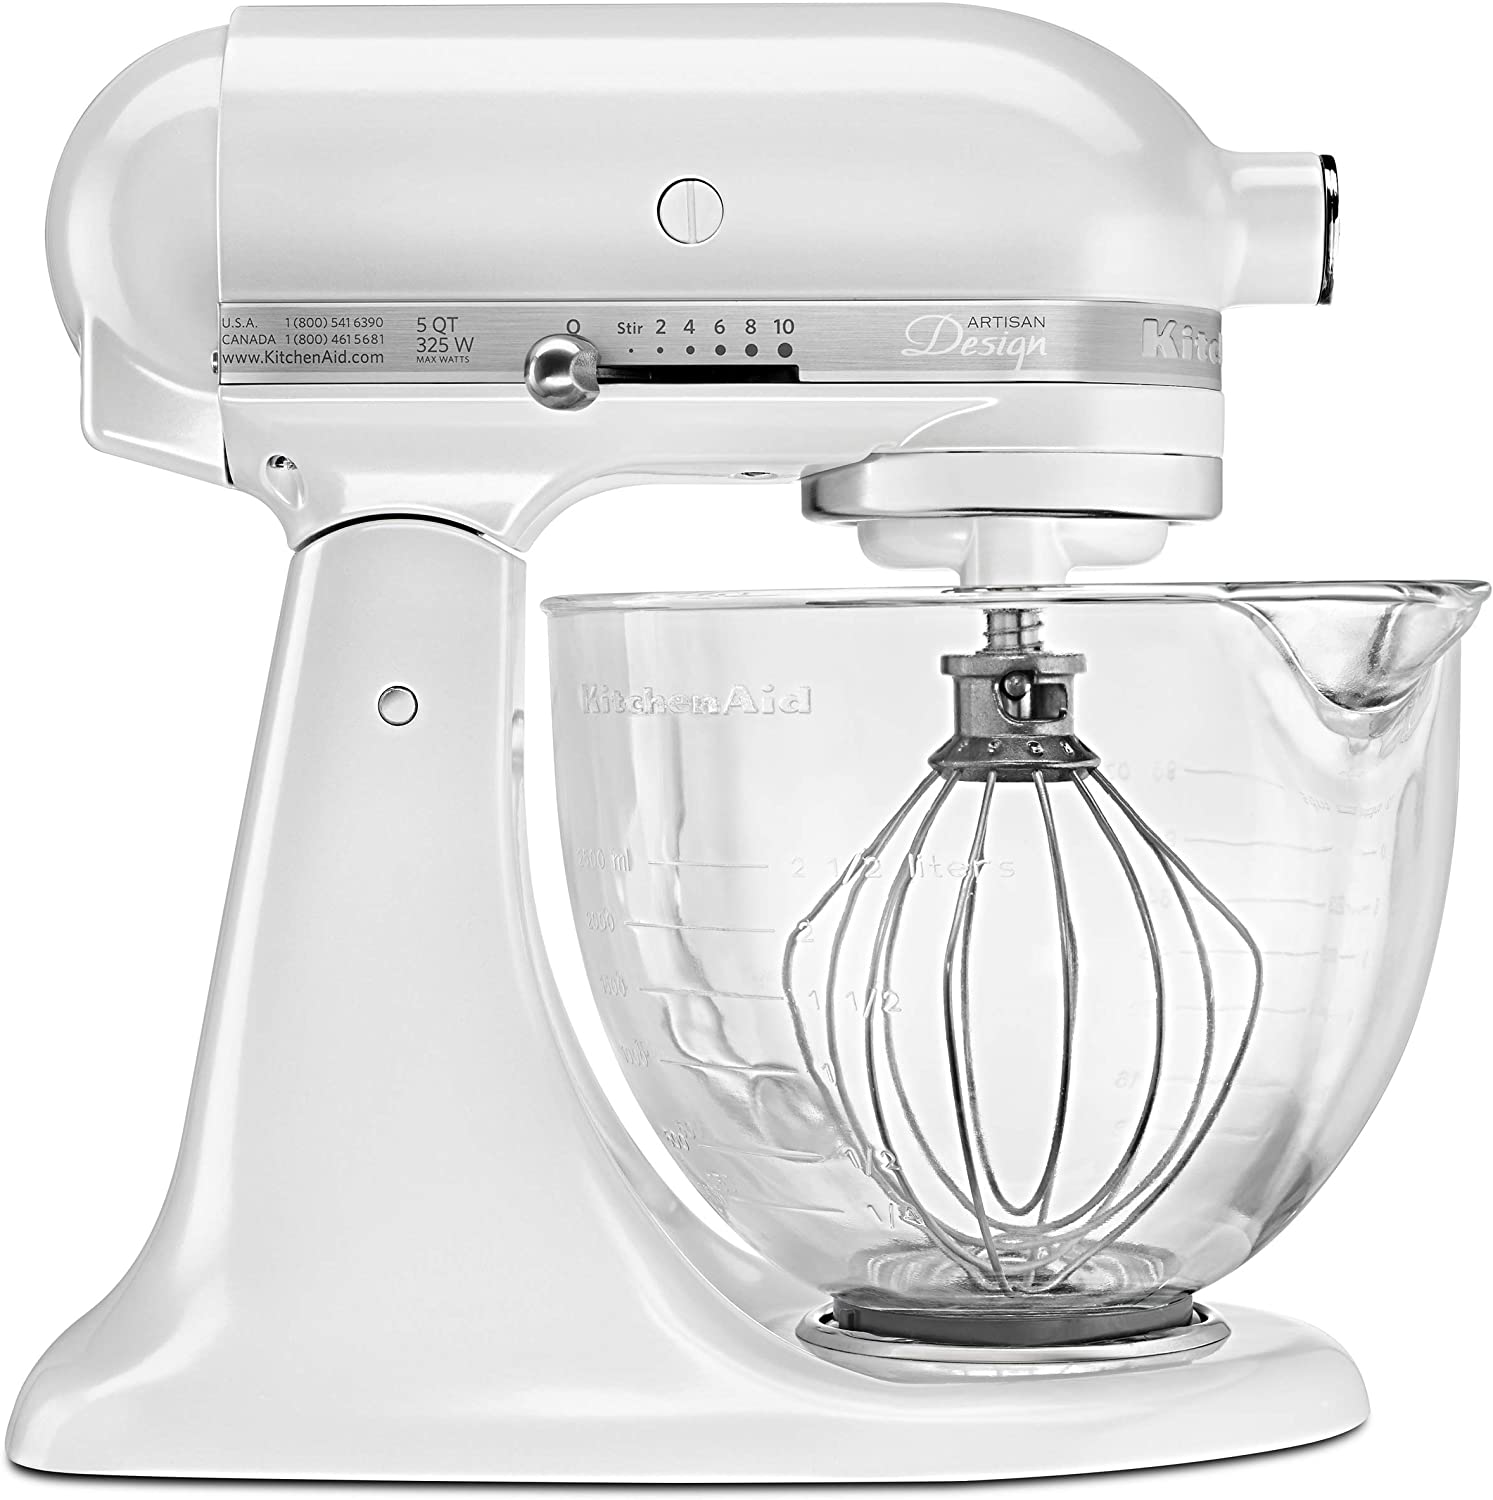 30th-anniversary-gifts-kitchen-aid